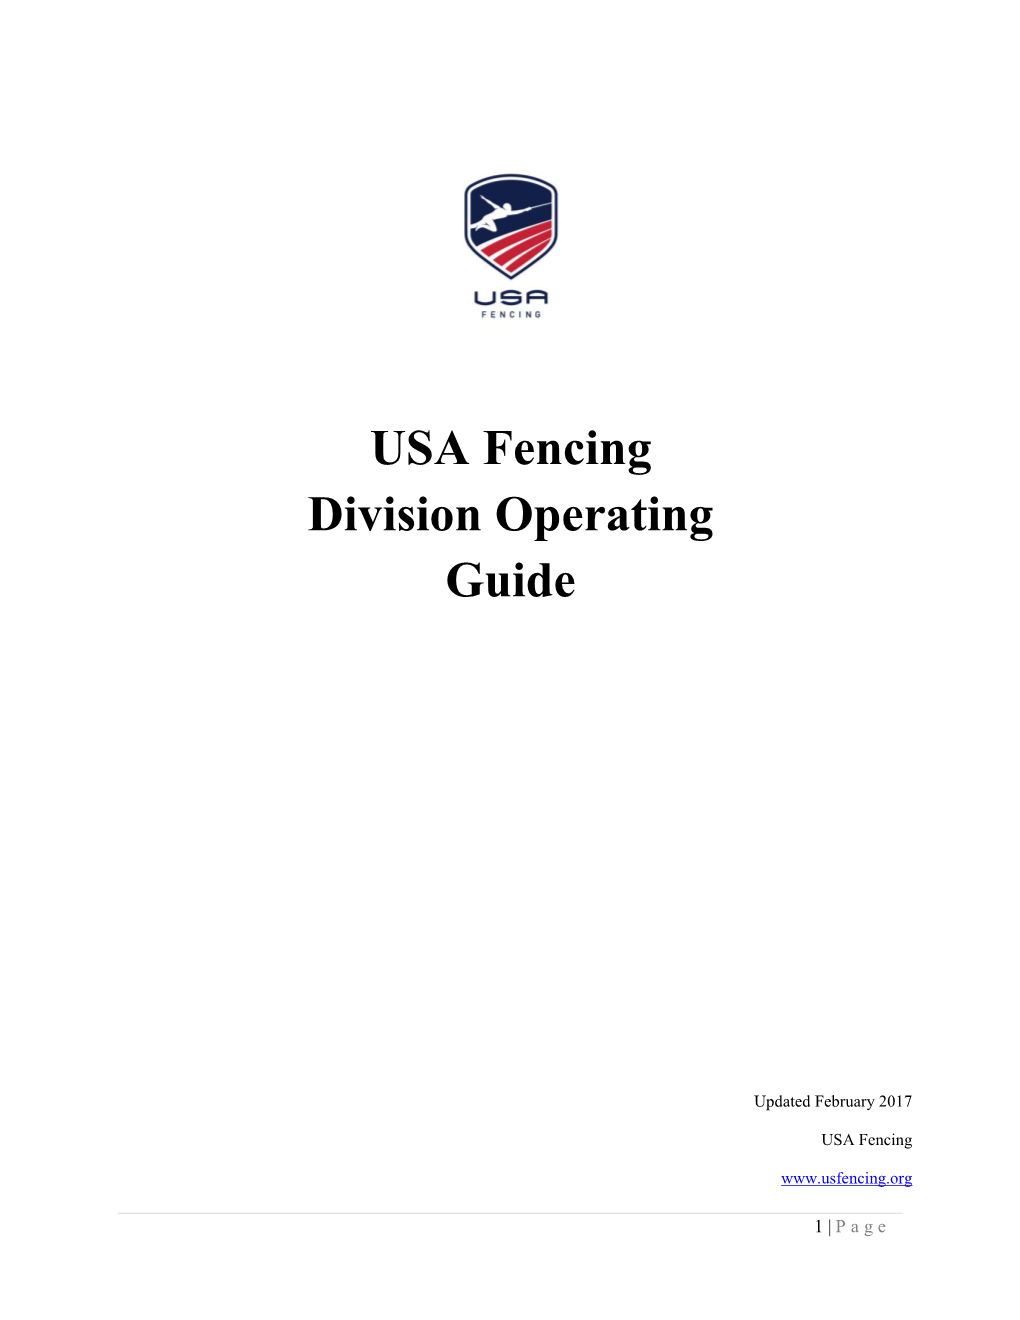 USA Fencing Division Operating Guide